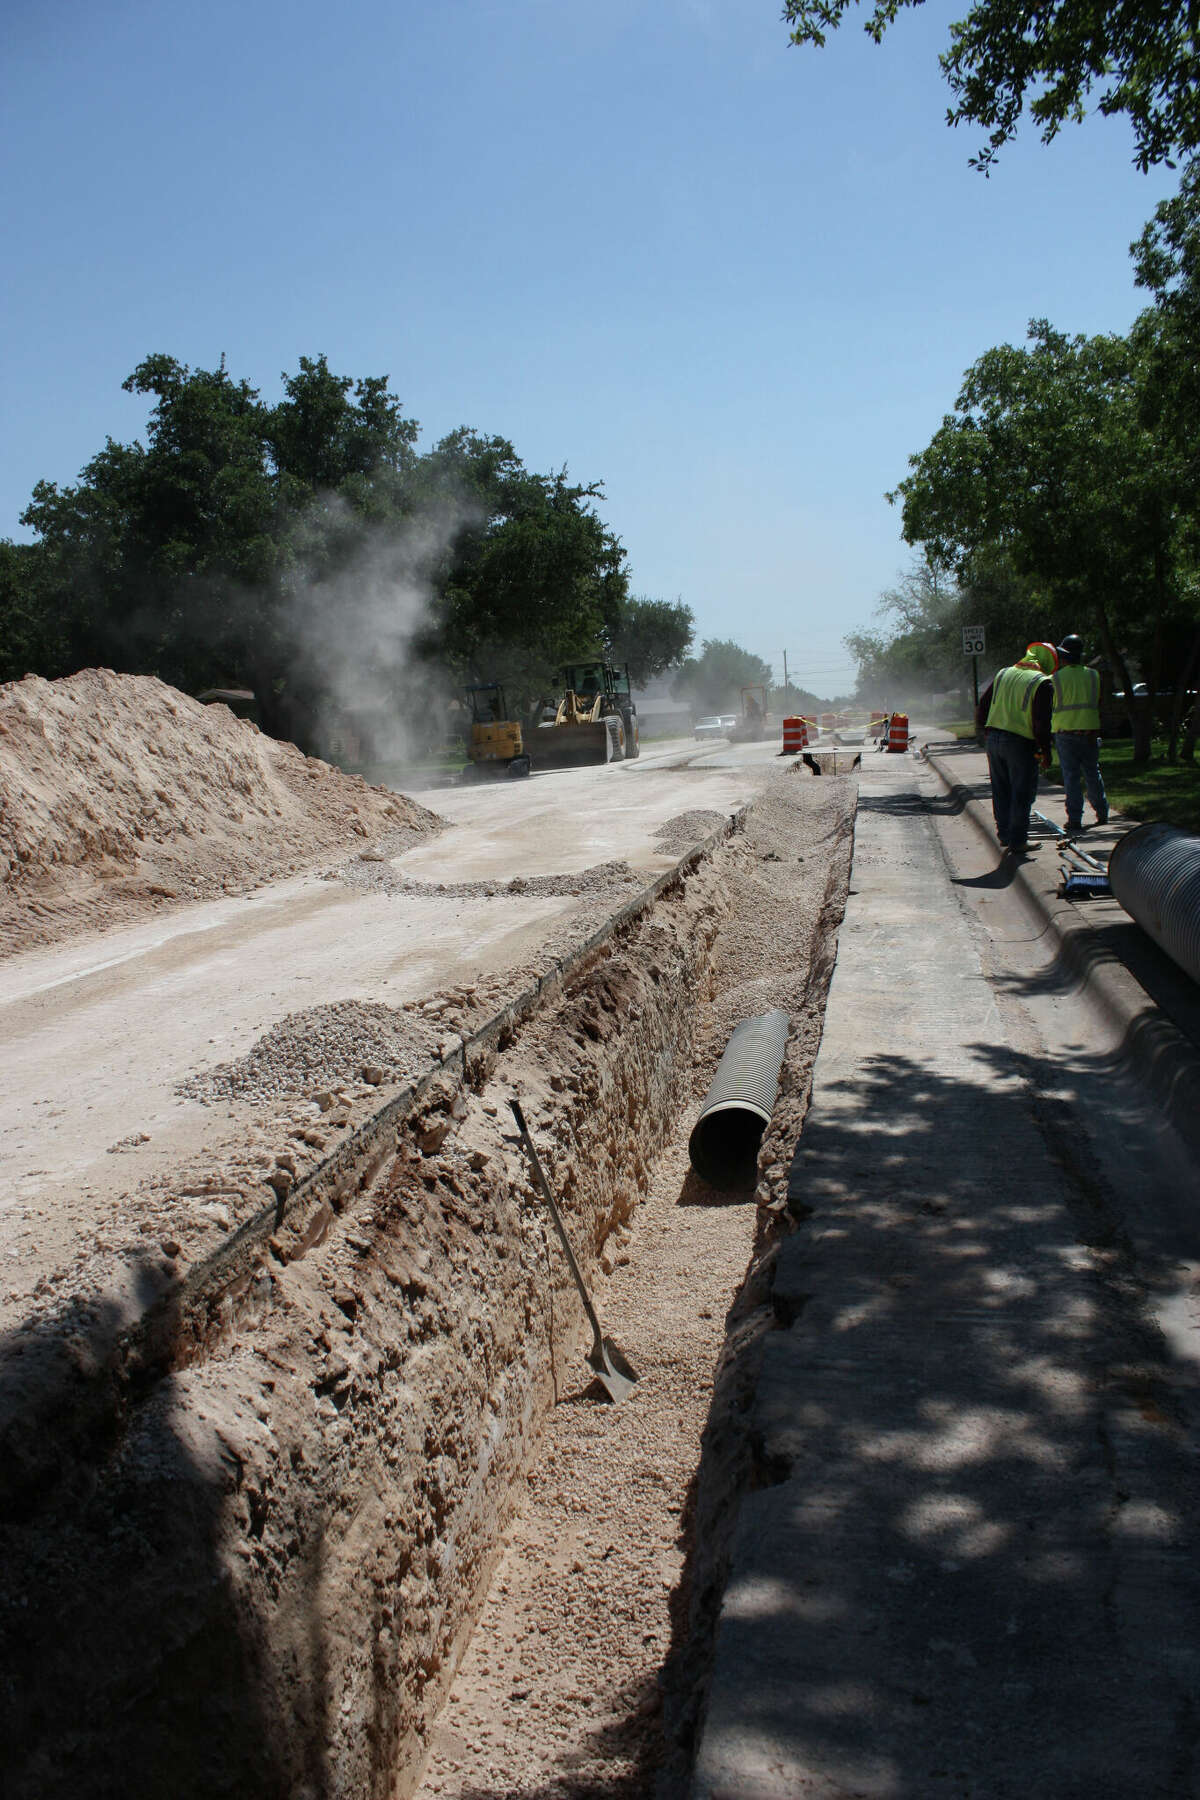 Road construction taking place inside the city of Midland